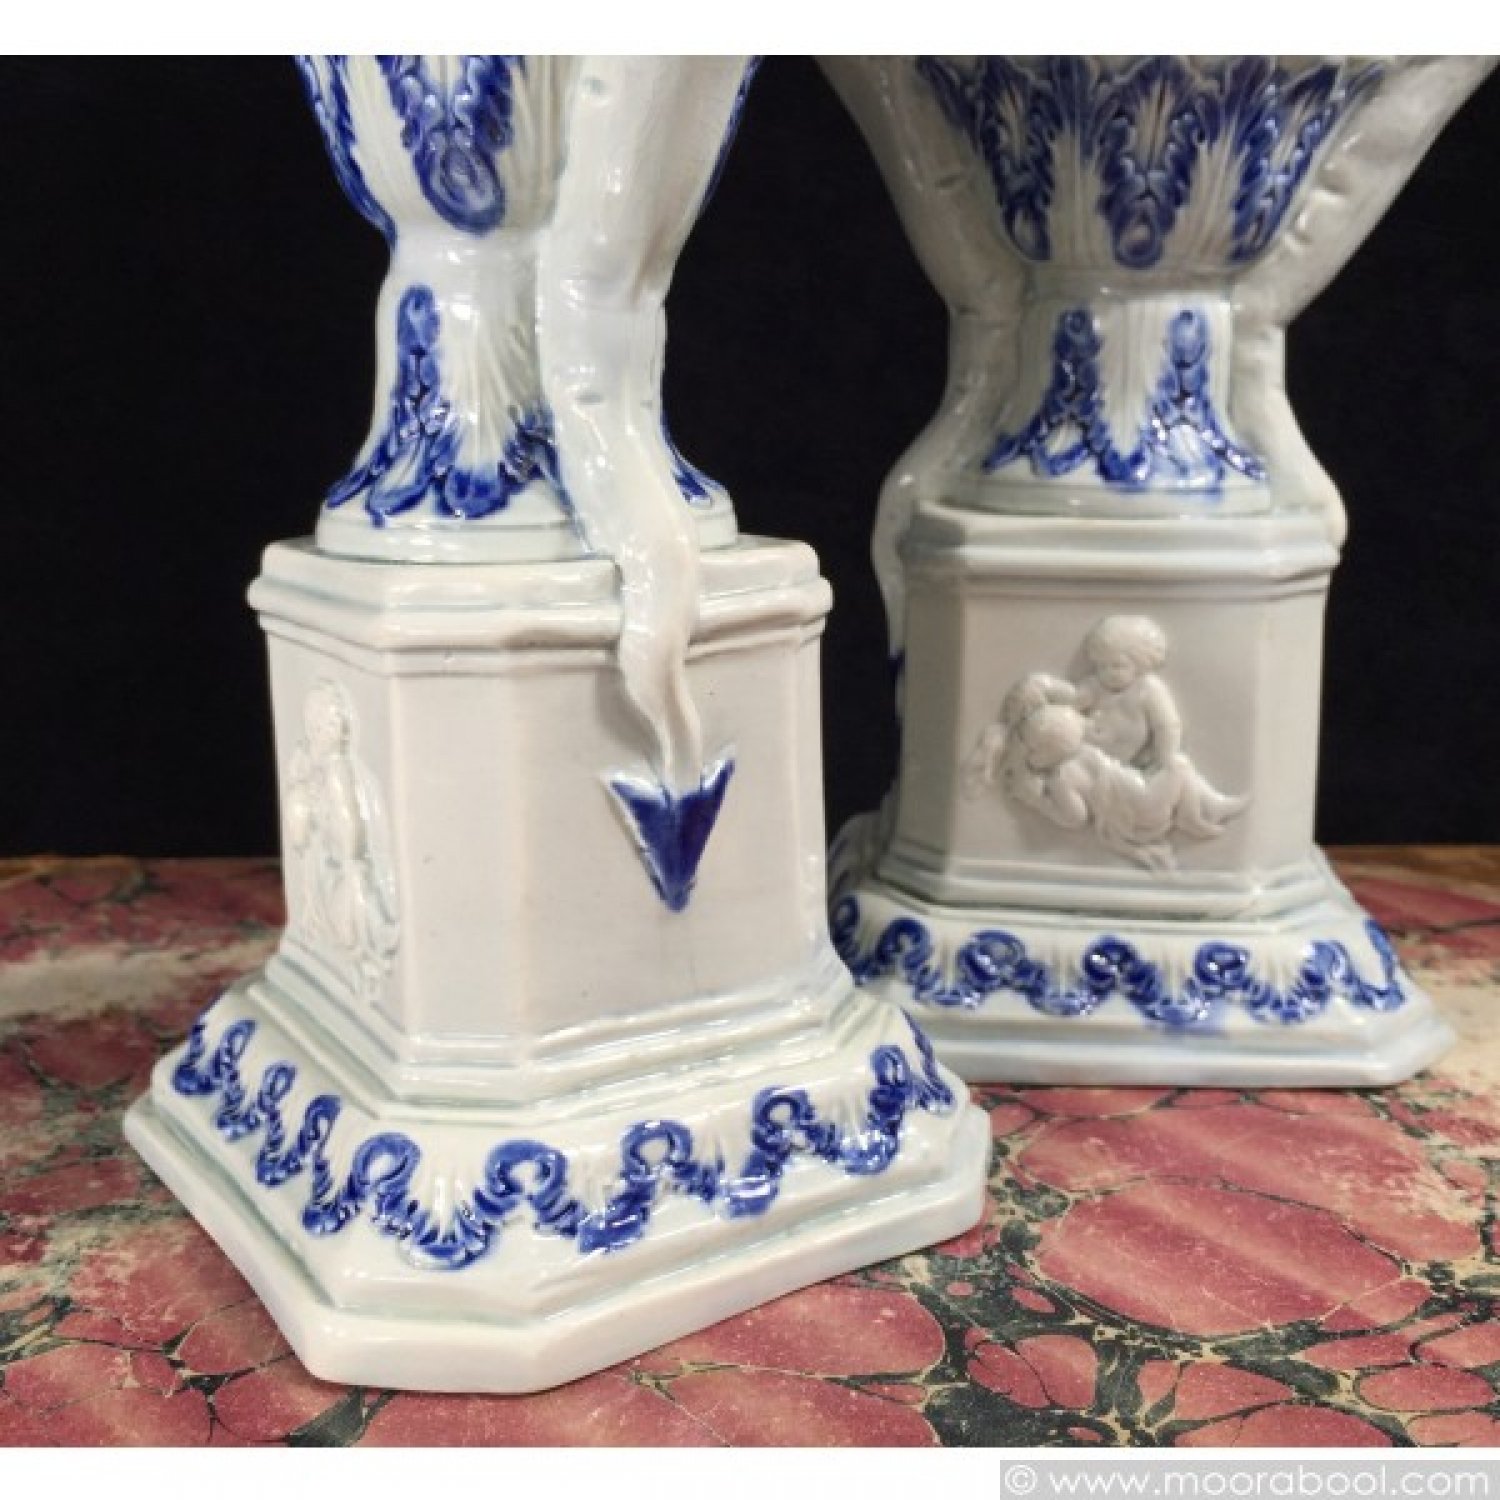 Pair of pearlware 'dragon' vases with cherubs, circa 1800